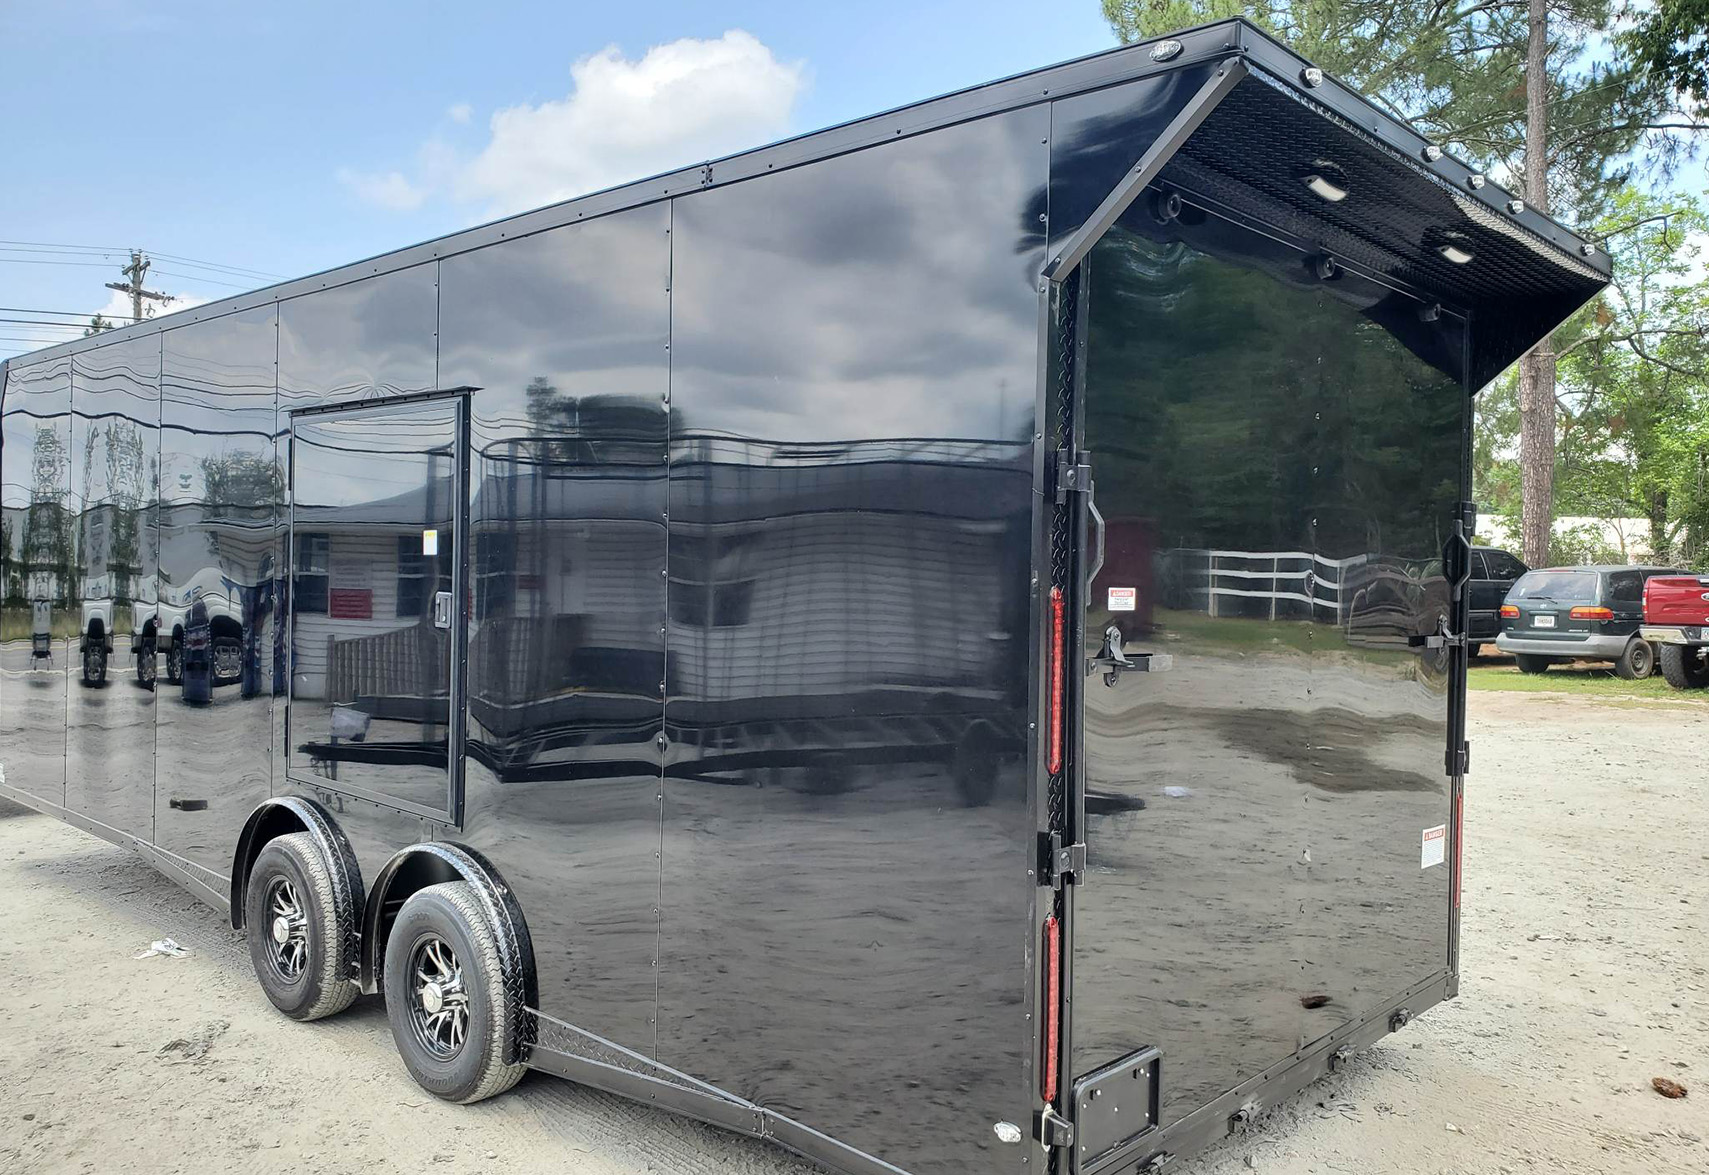 The image depicts a large black trailer with a closed door, parked on what appears to be an asphalt surface.